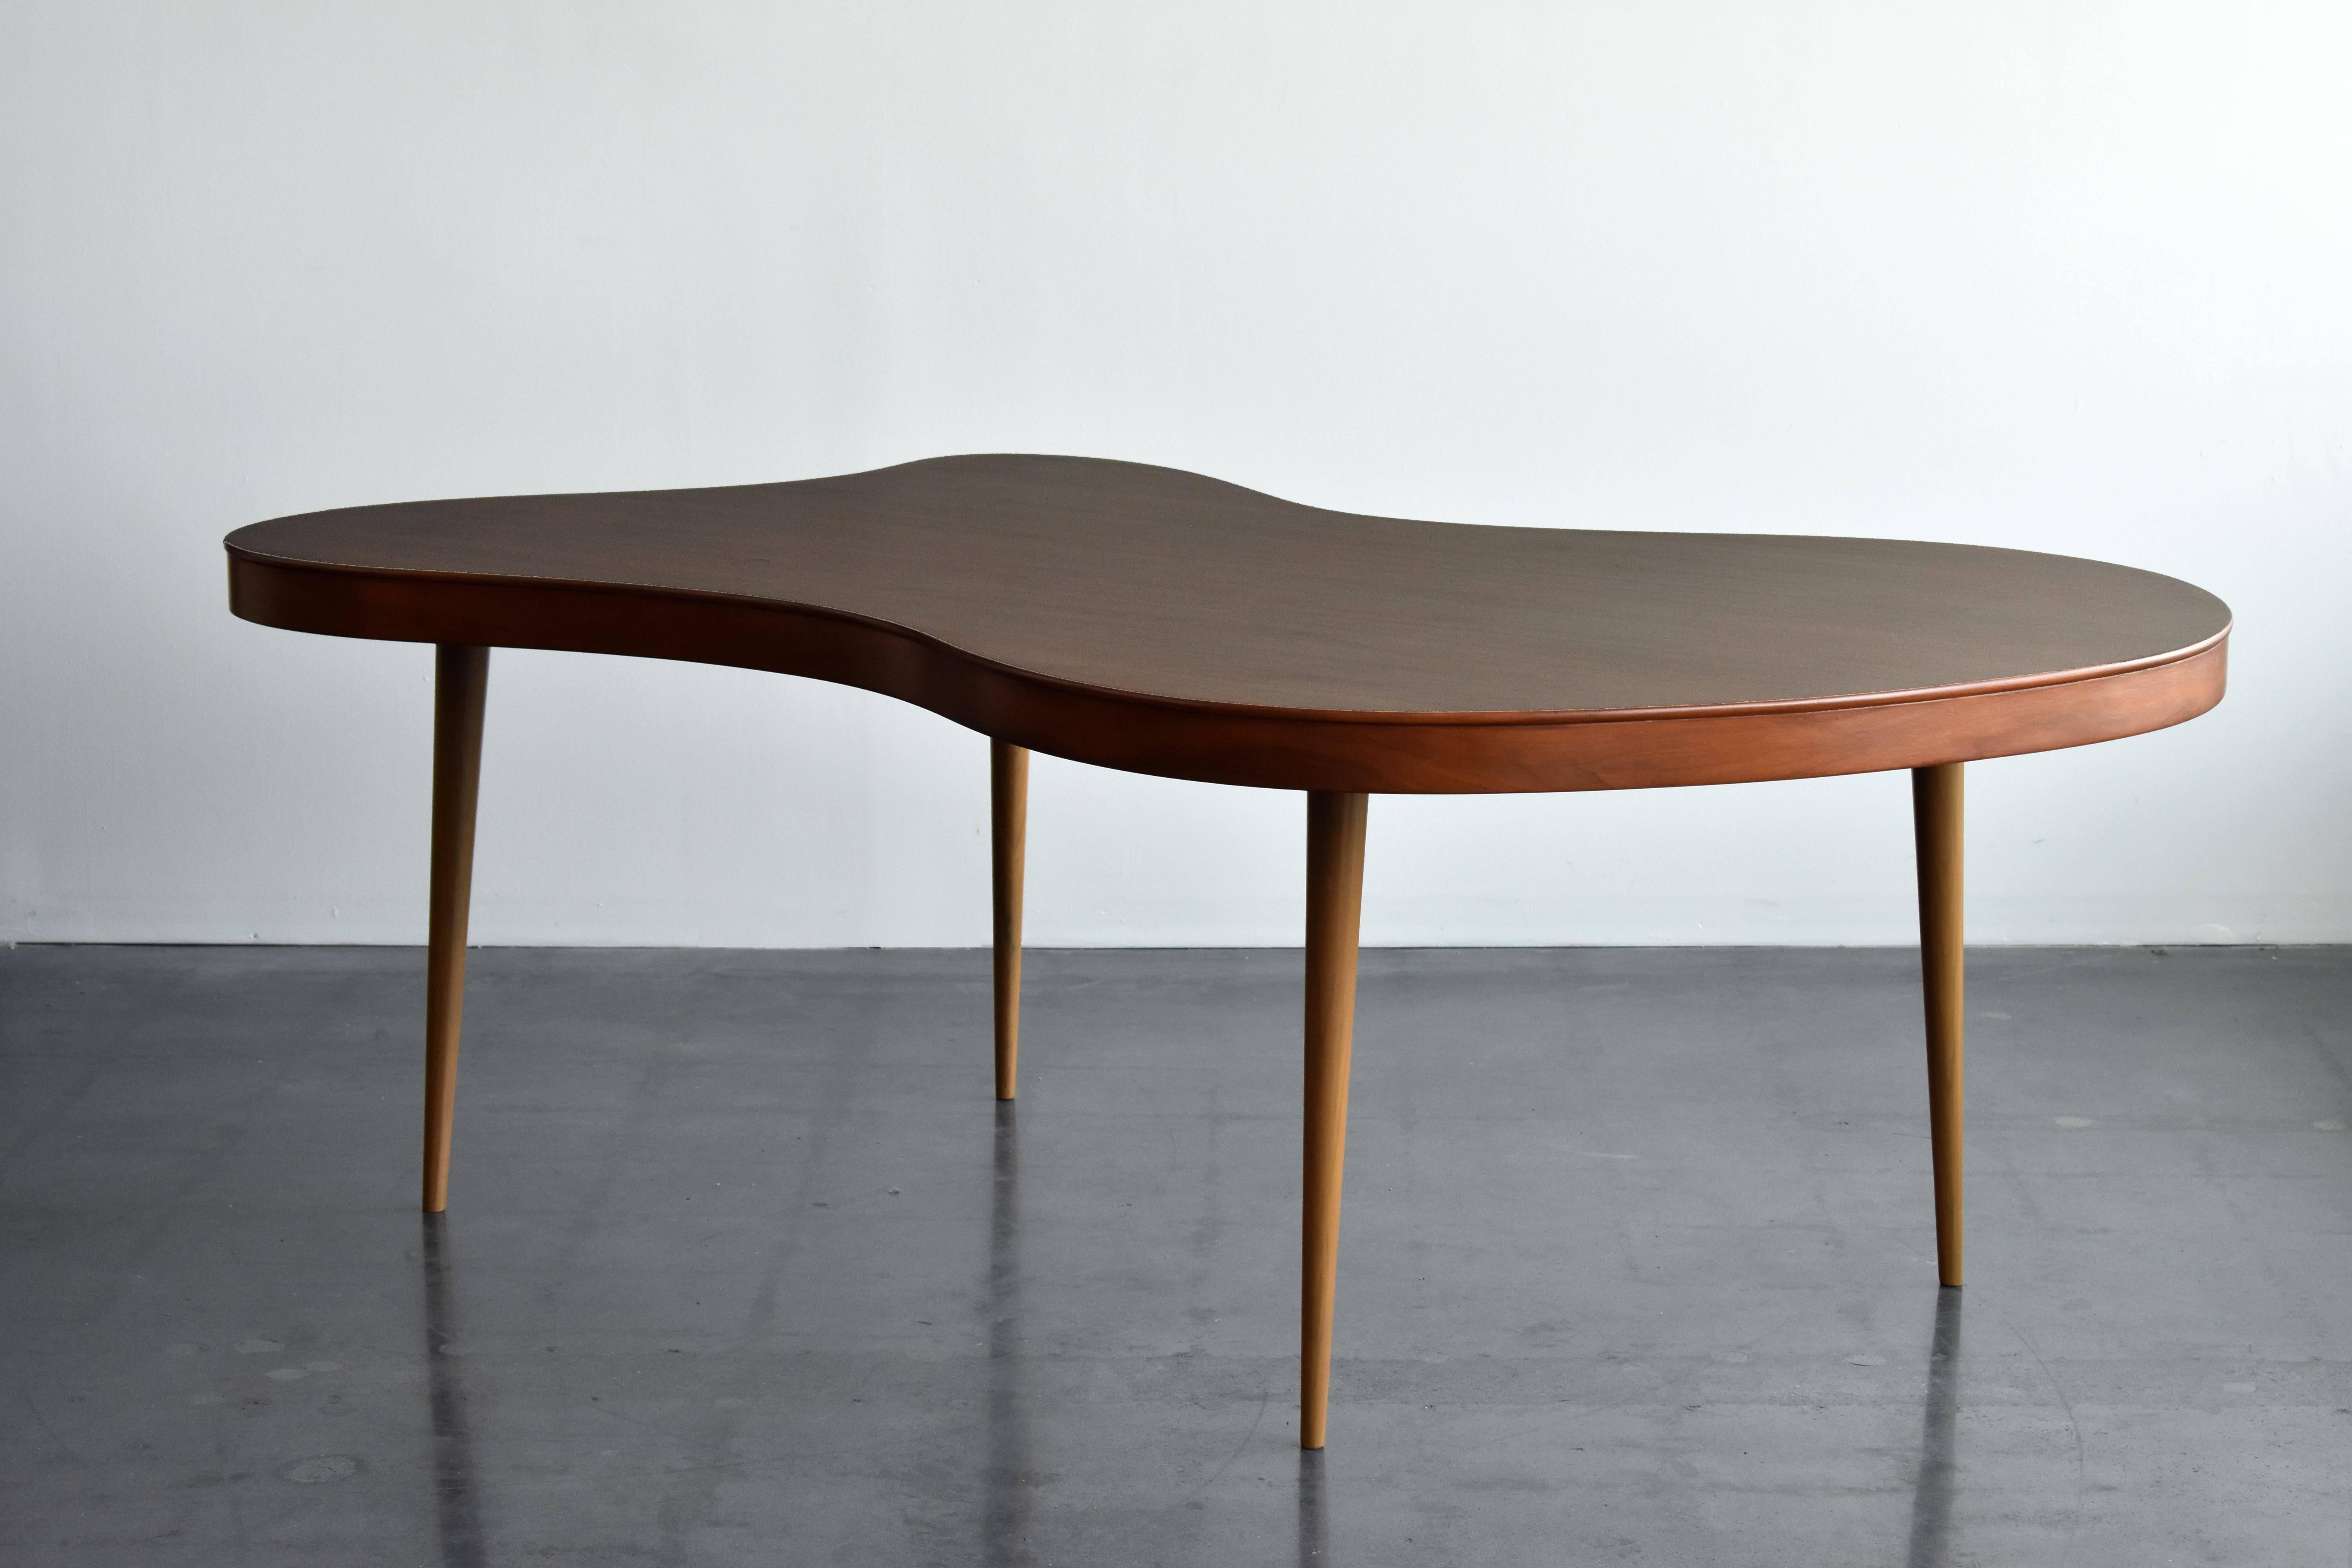 An organic/free-form dining table, an anonymous American designer, circa 1950s. Produced in oak. 

Bears a form similar to works by Paul Frankl, T.H. Robsjohn-Gibbings, Paul Laszlo, Gilbert Rohde, and Jean Royère. 

Also useable as games table or